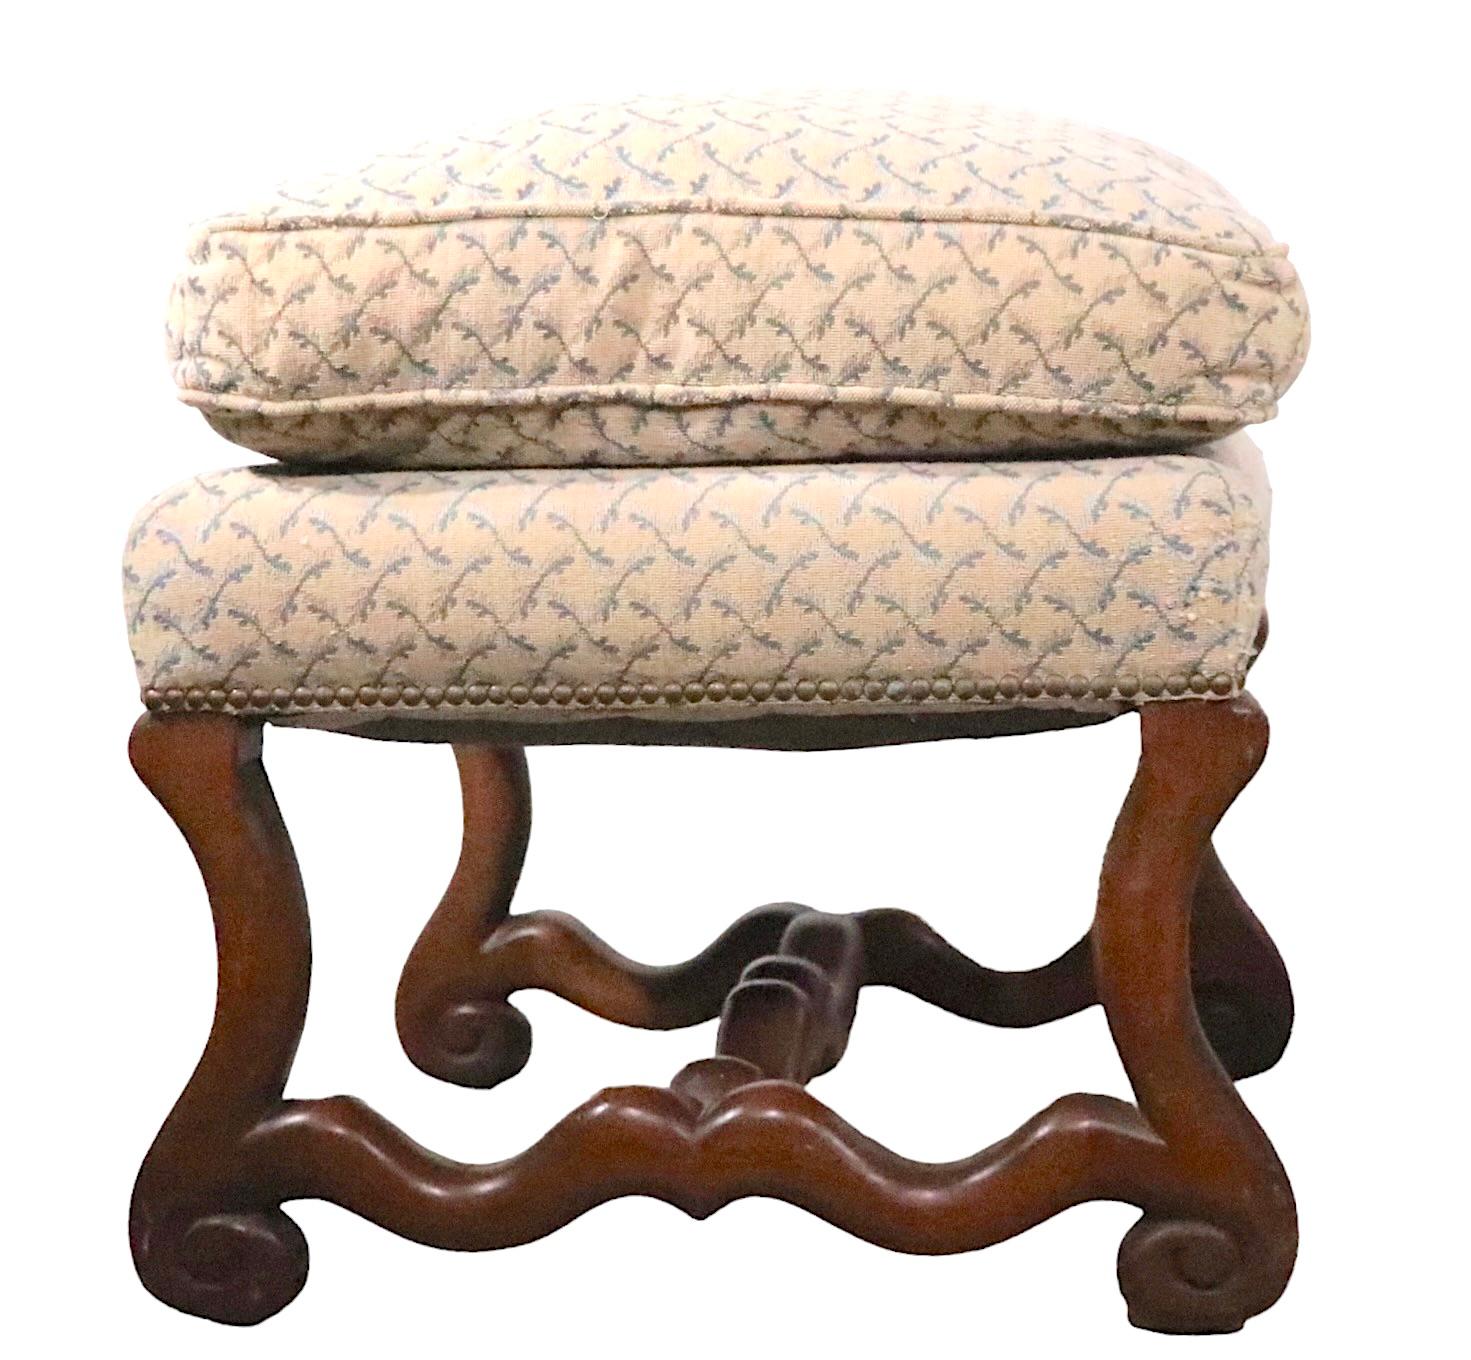 Pr. Contemporary Os De Mouton Style Ottoman Pouf, Benches  In Good Condition For Sale In New York, NY